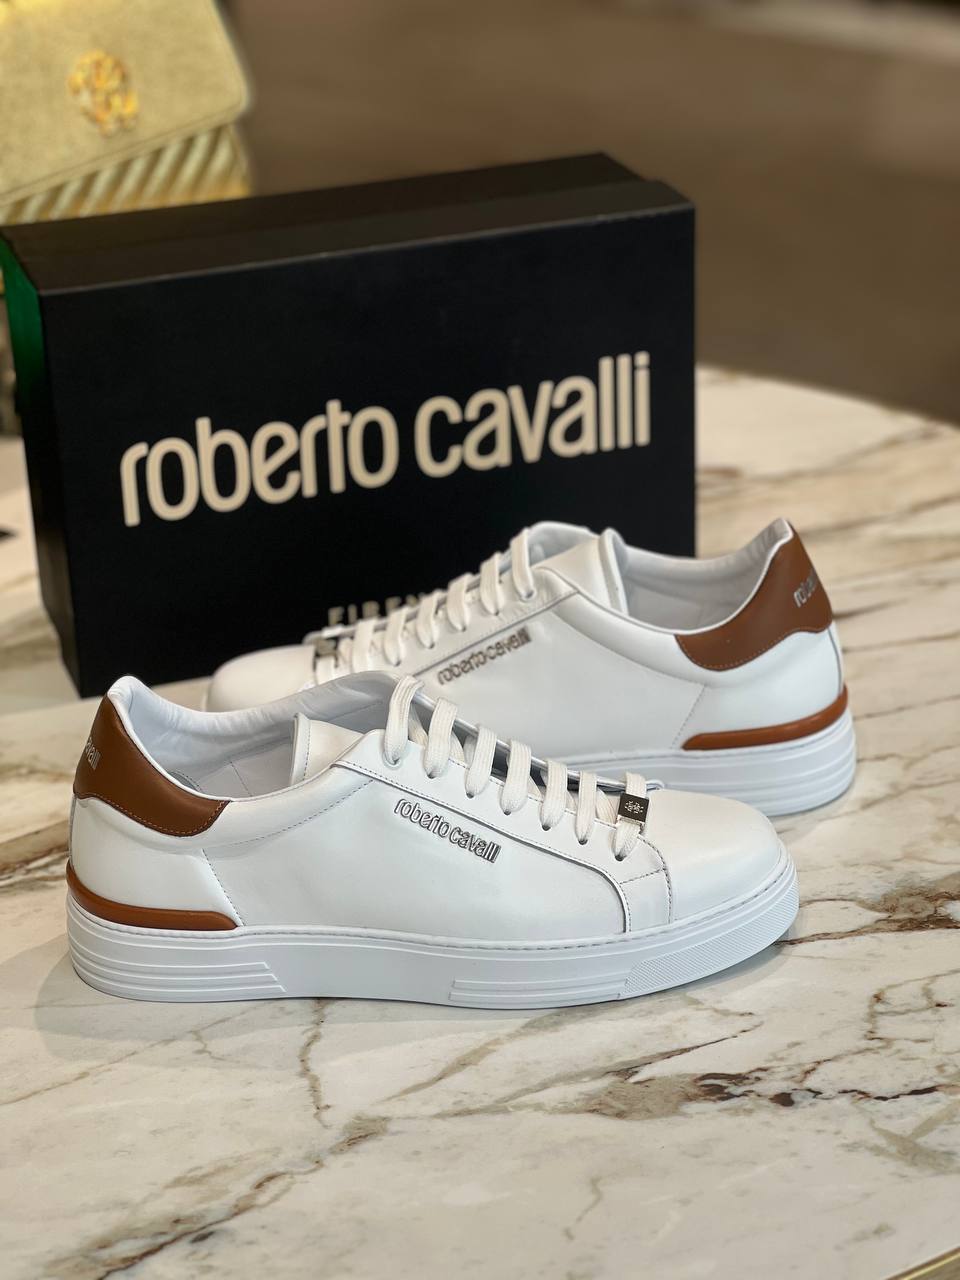 Roberto Cavalli Outlets 5927